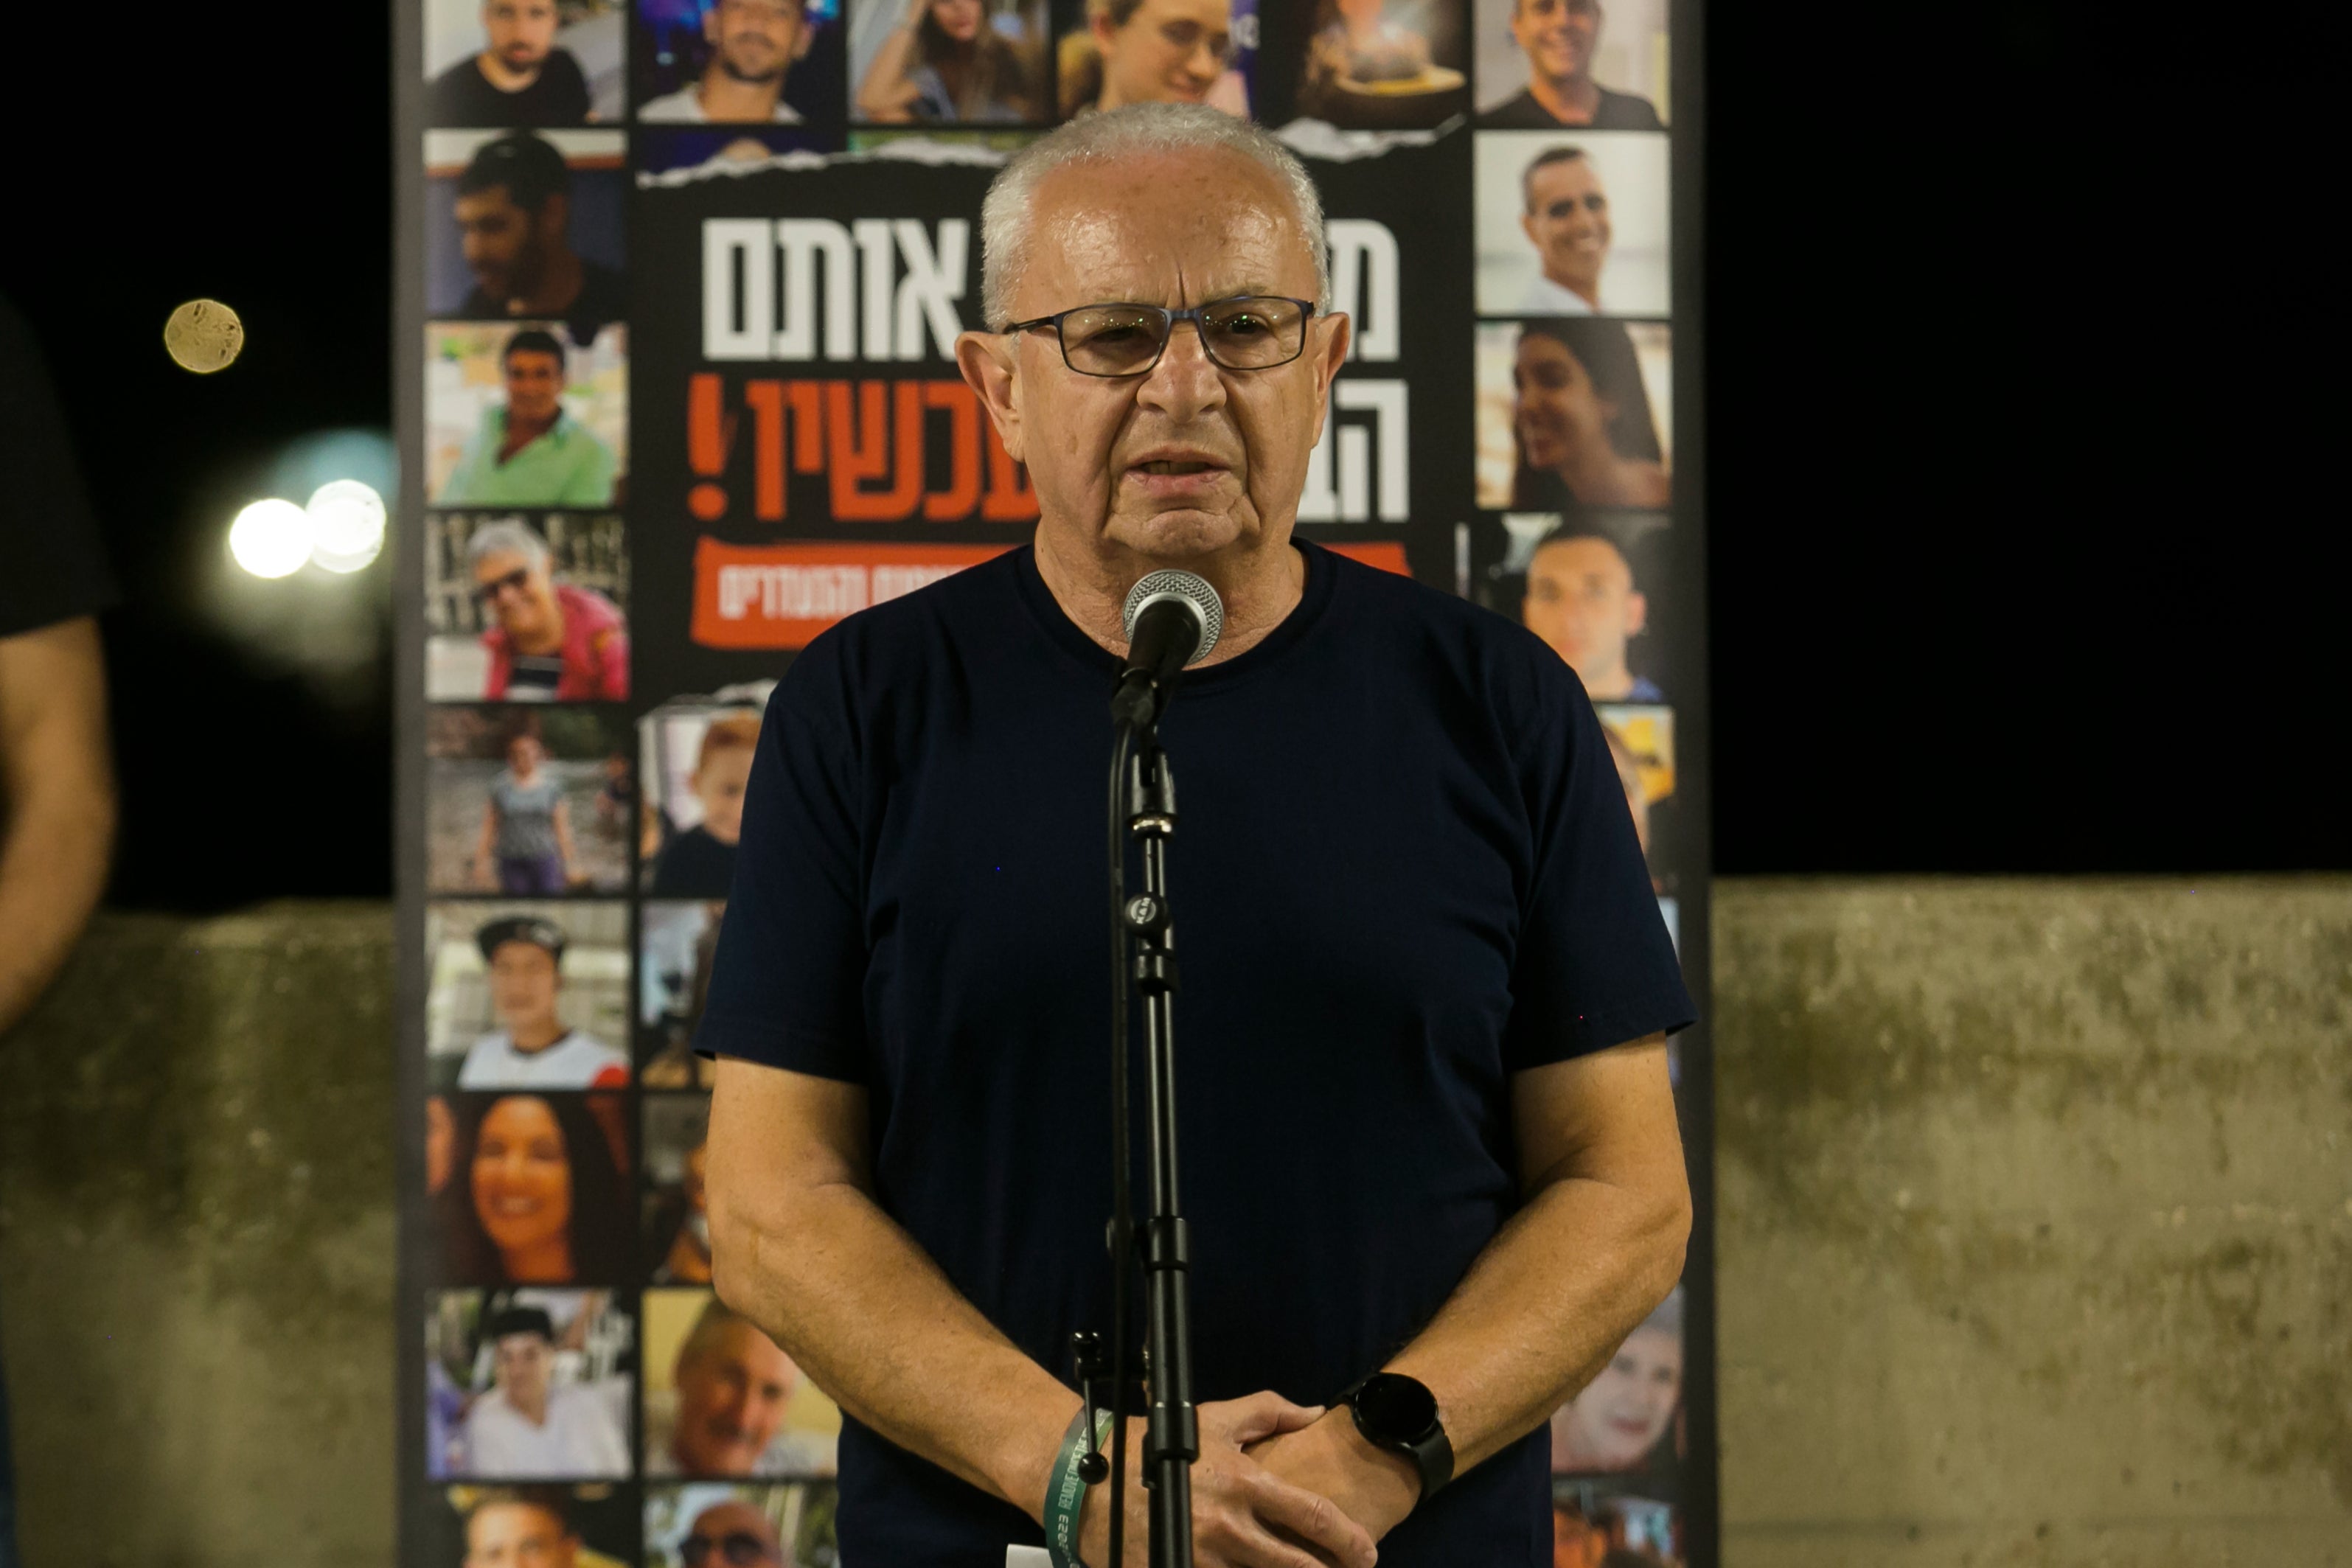 <p>Ramos Aloni, father of hostage Danielle Aloni who featured in the video released by Hamas, speaks at a press conference</p>